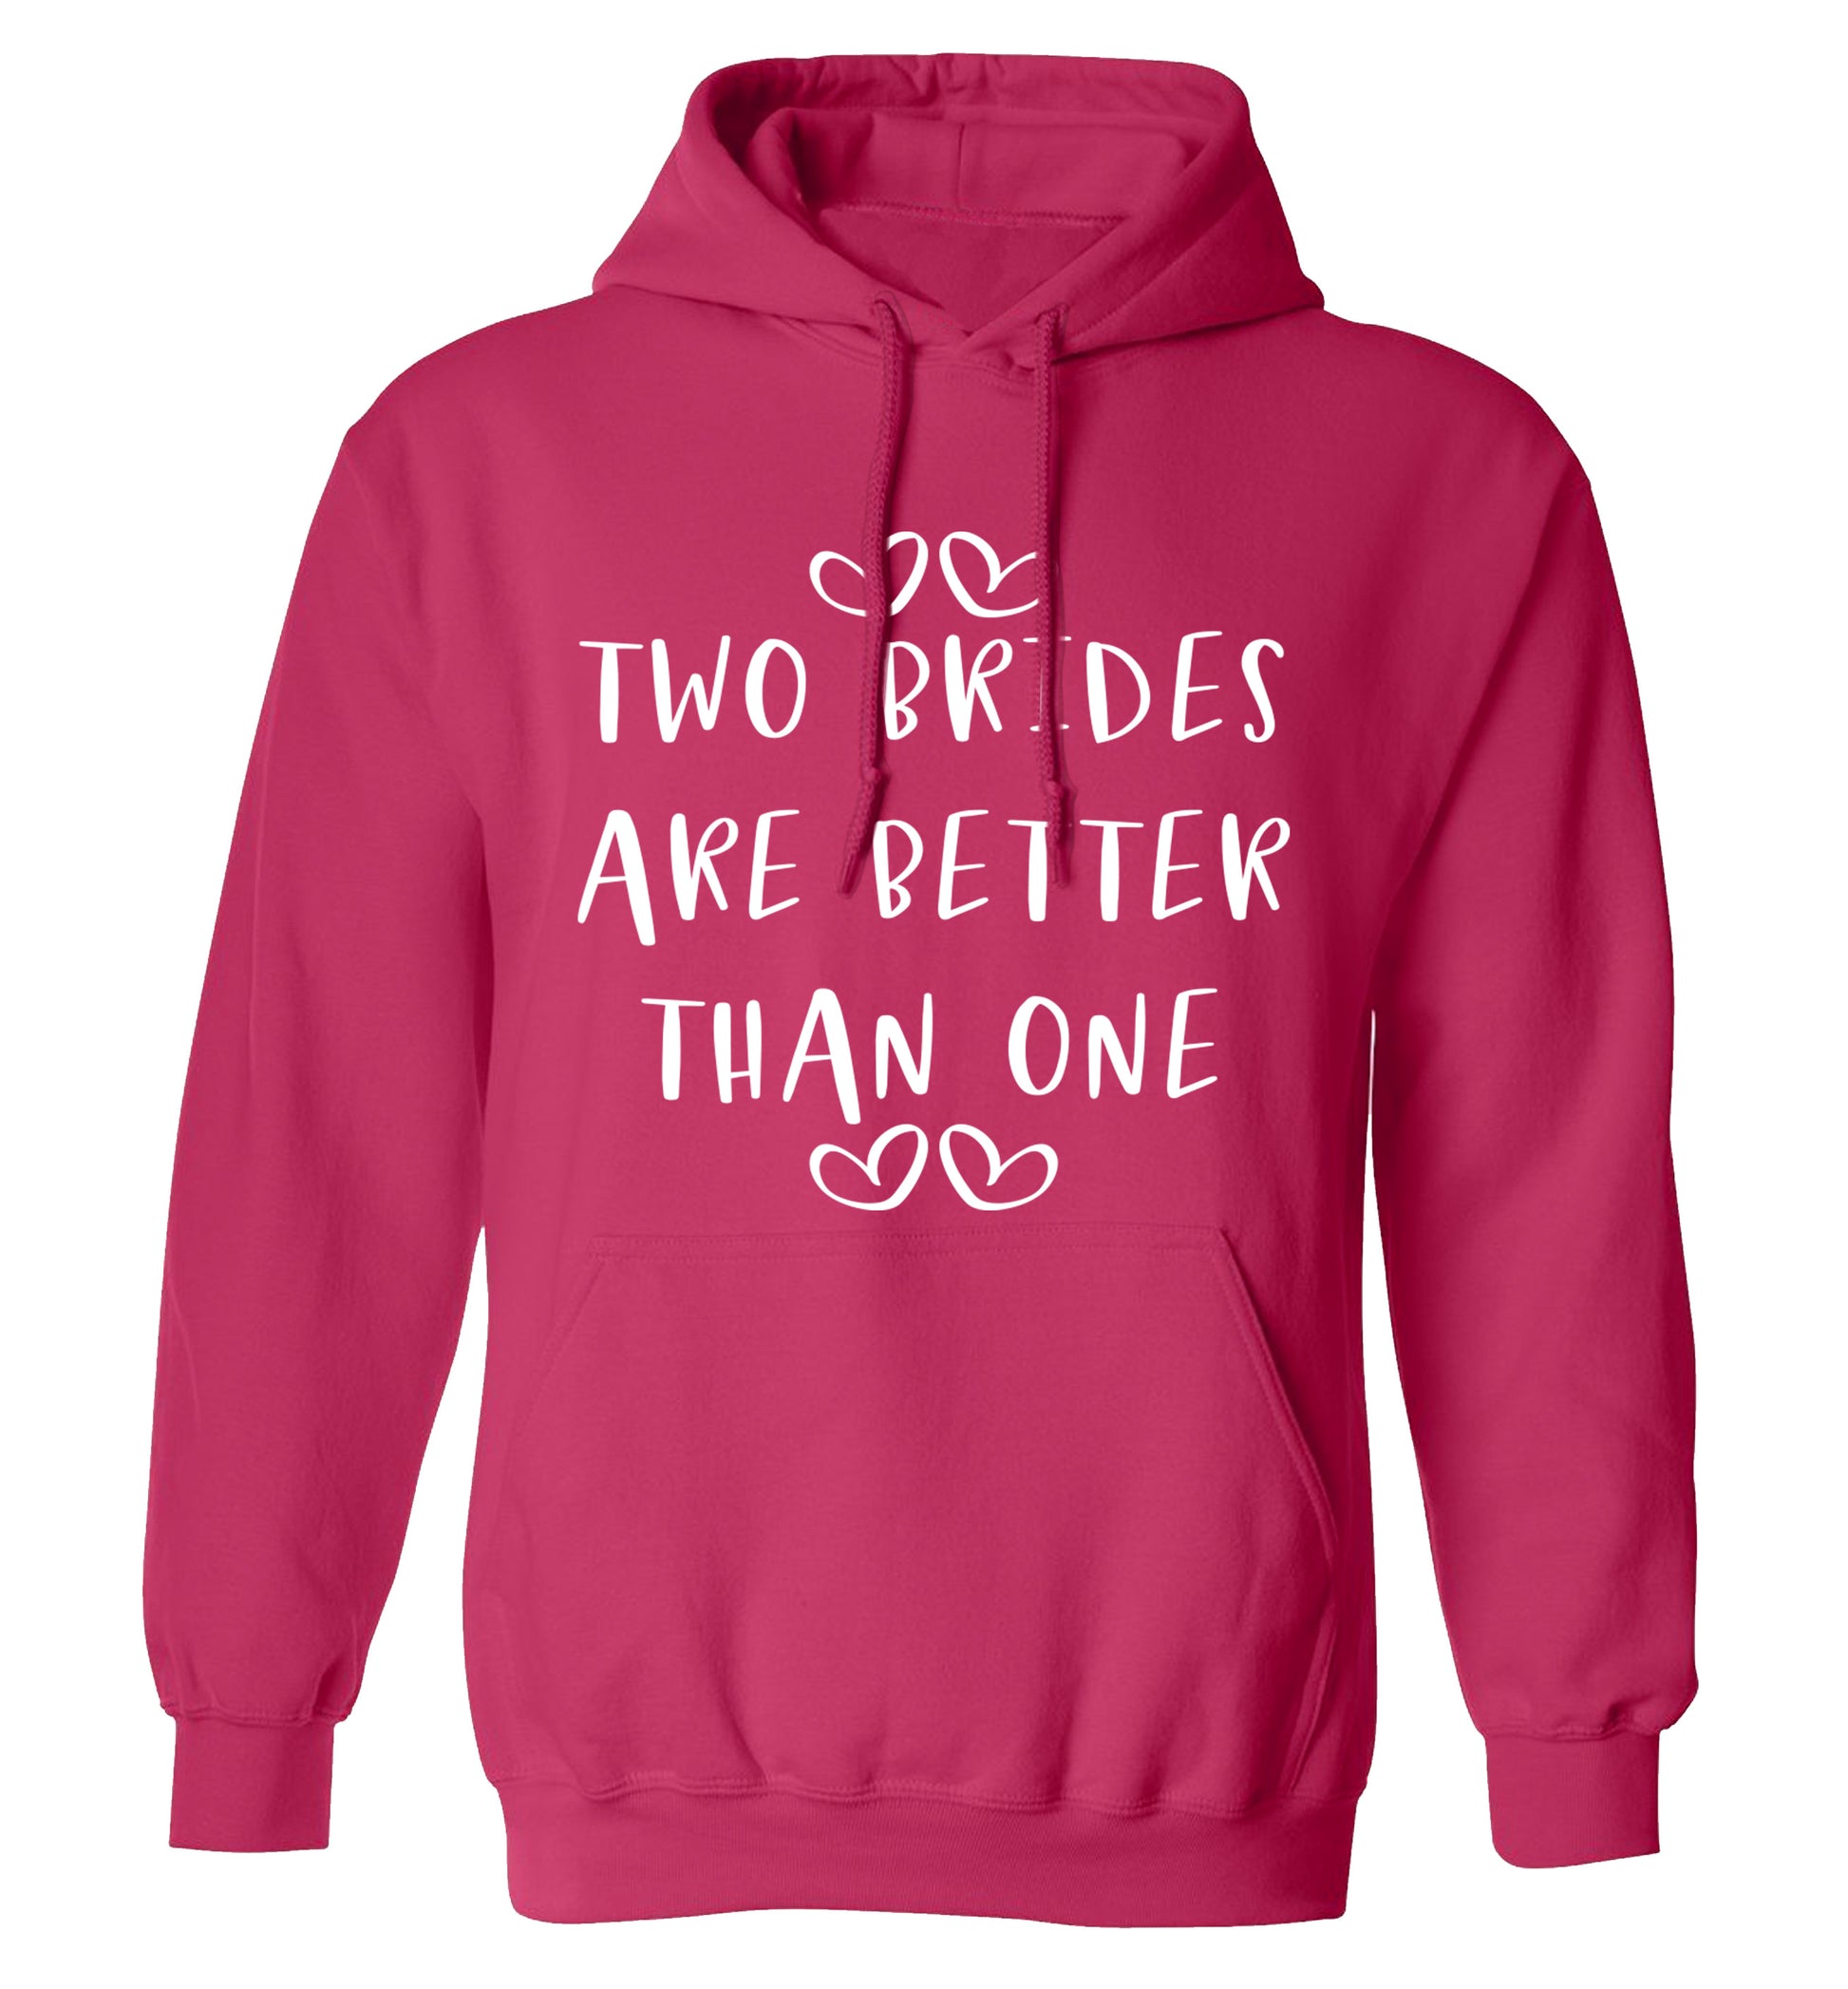 Two brides are better than one adults unisex pink hoodie 2XL